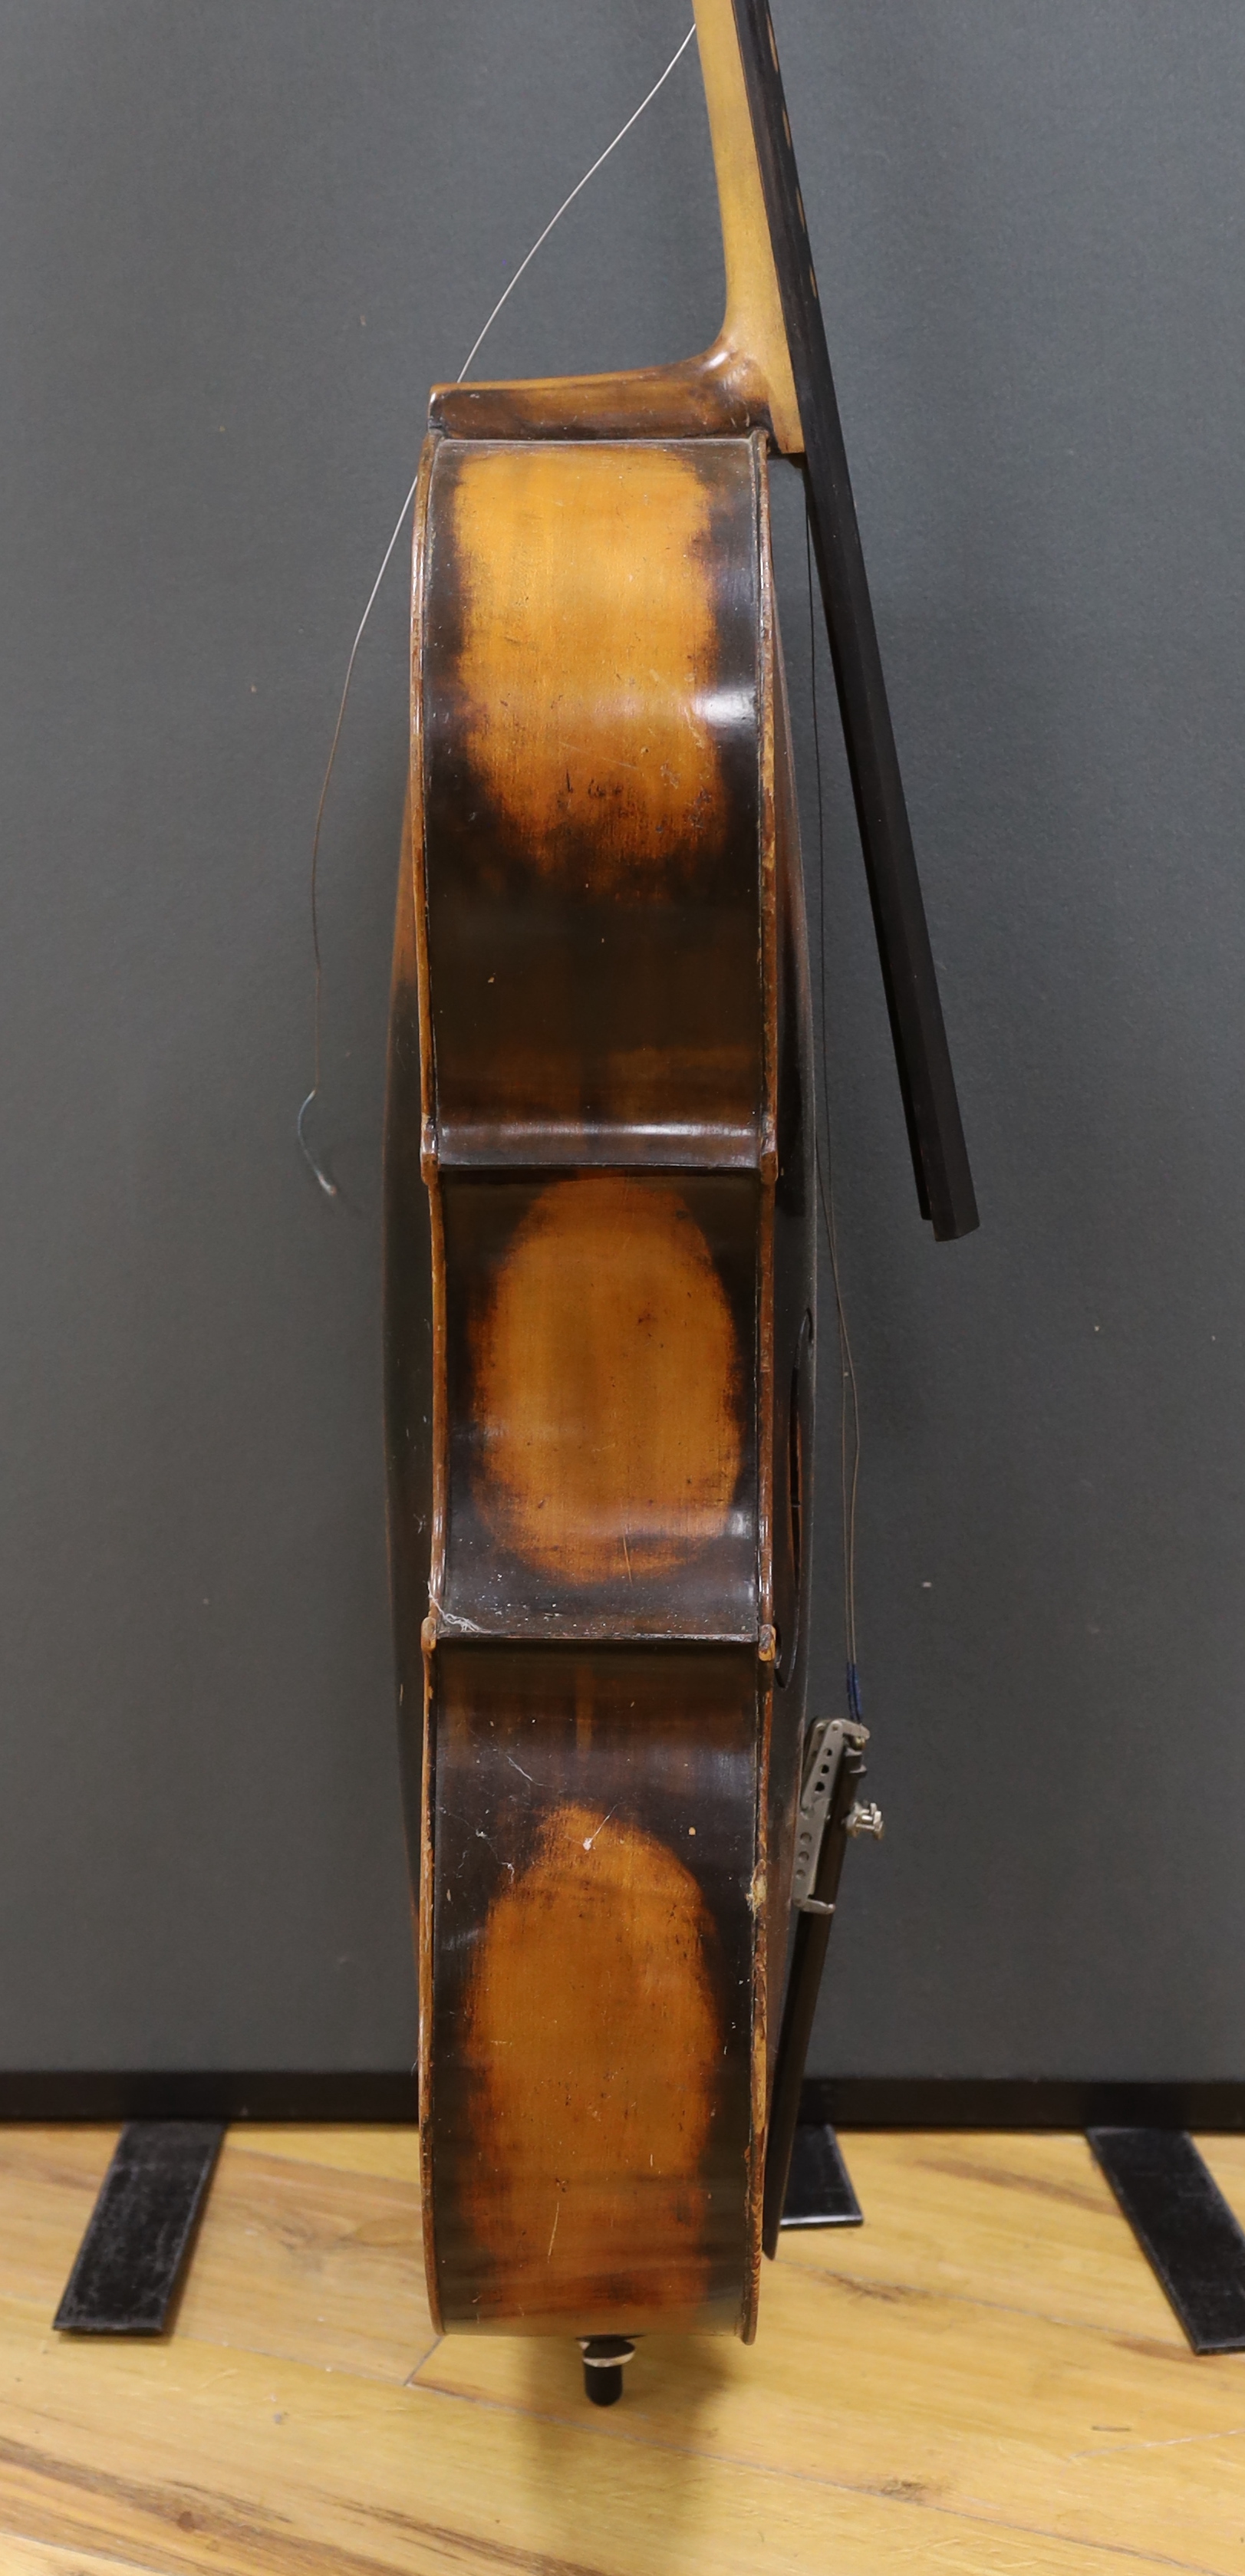 A full size cello labelled Adolf Stowaller, cased, 132cm high